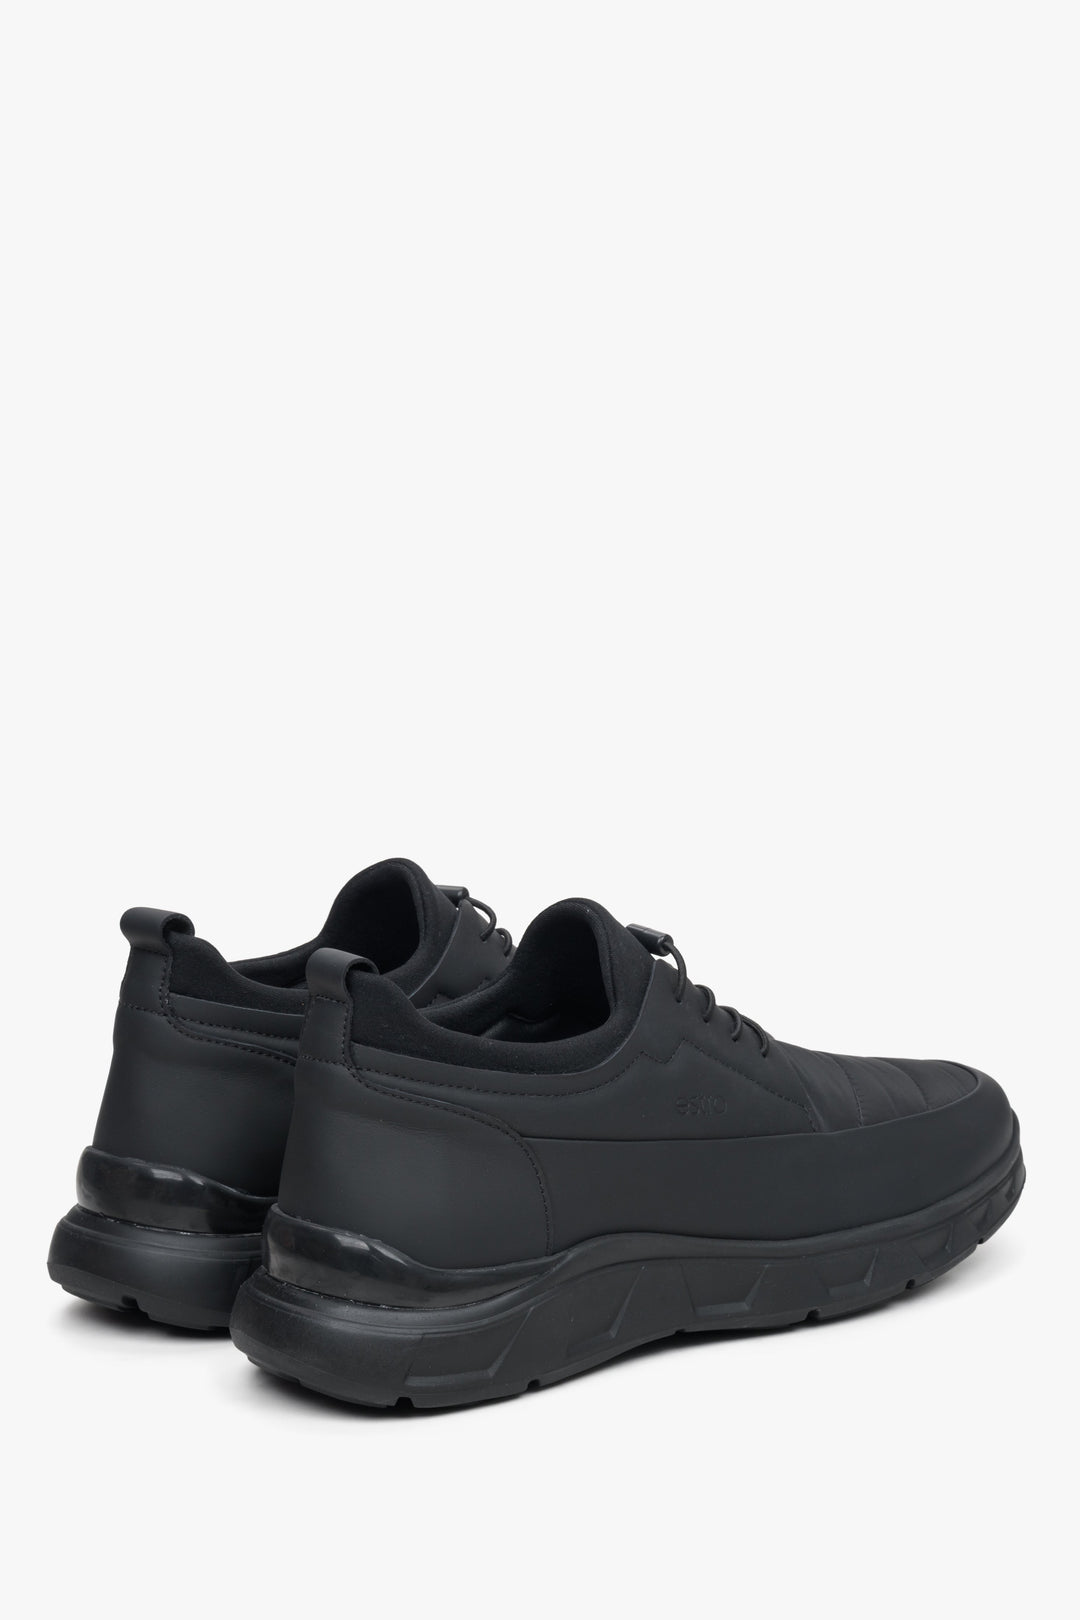 Comfortable men's black  sneakers by Estro - close-up on the side line and soft heel.